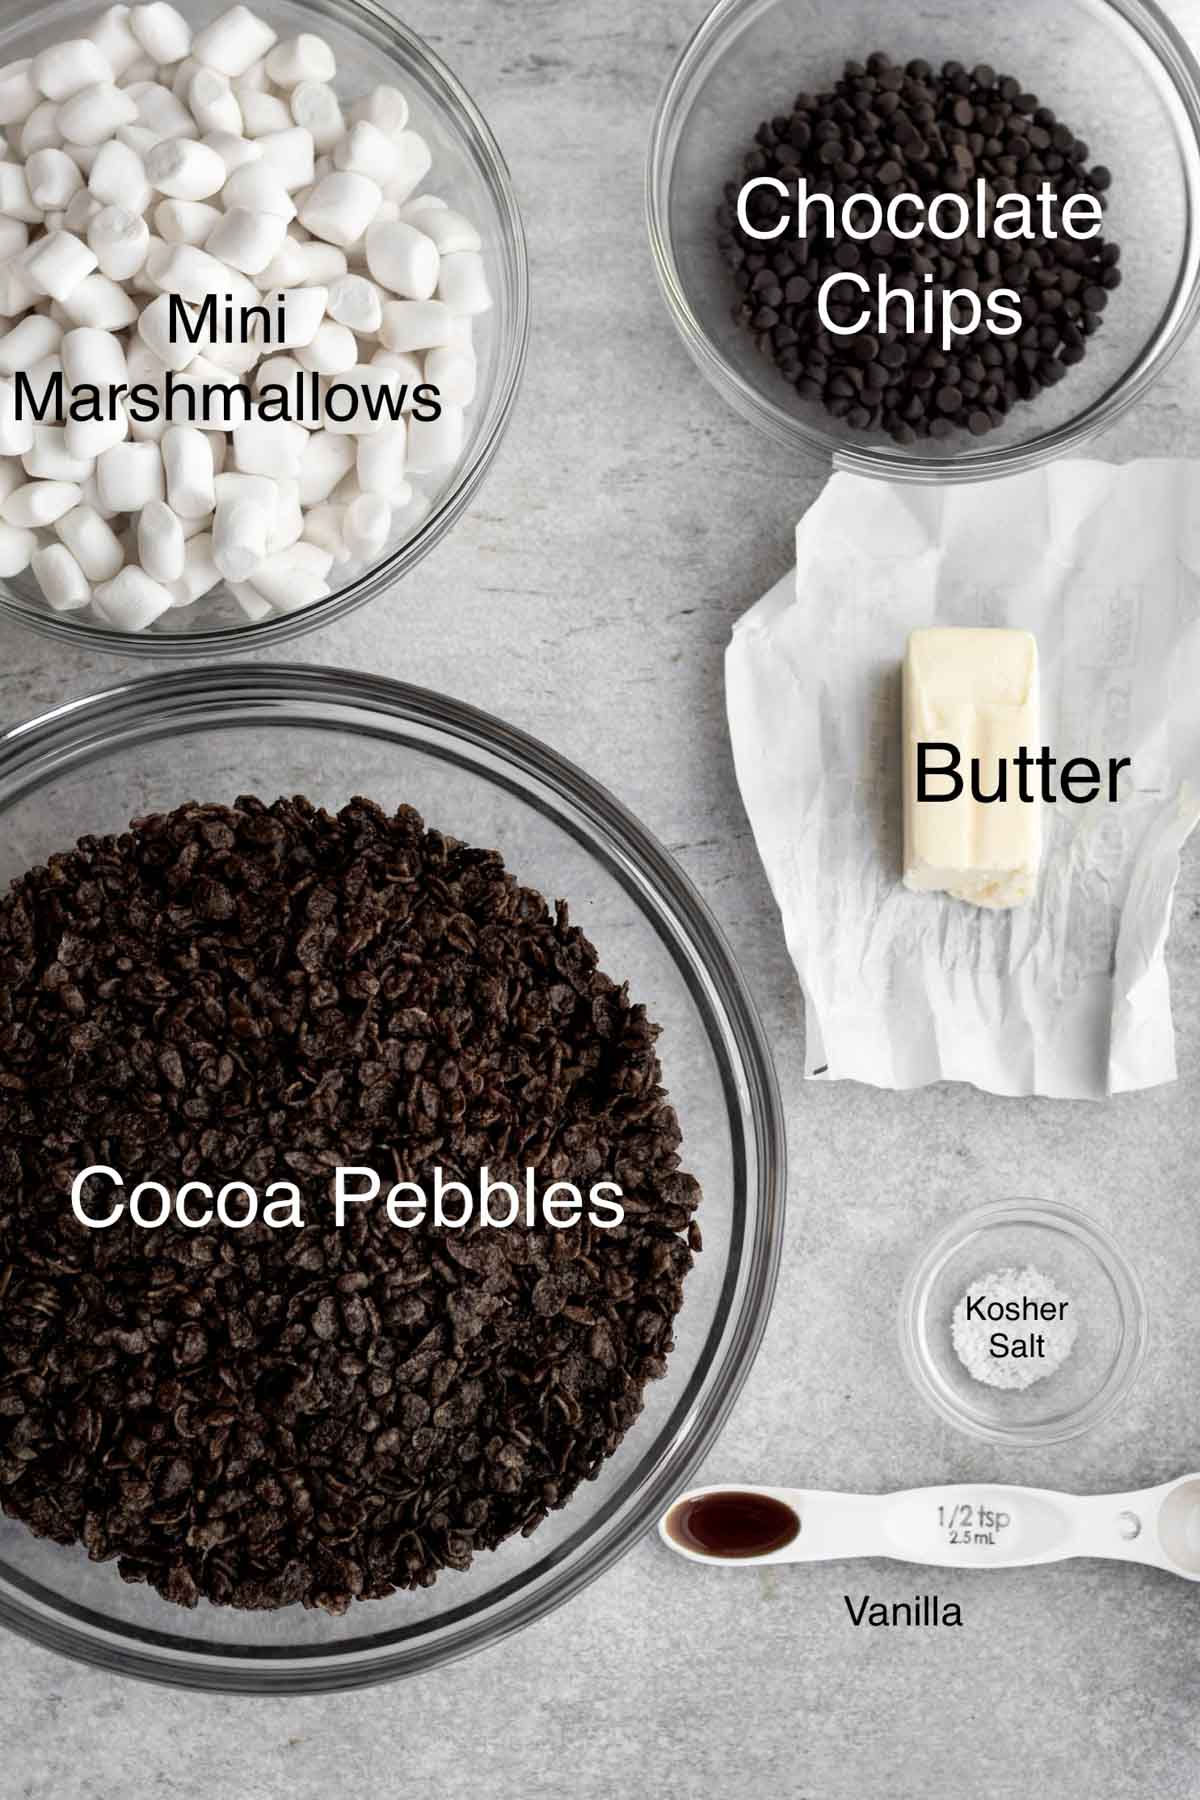 Mini Marshmallows, chocolate chips, cocoa pebbles, butter, salt and vanilla in separate containers.